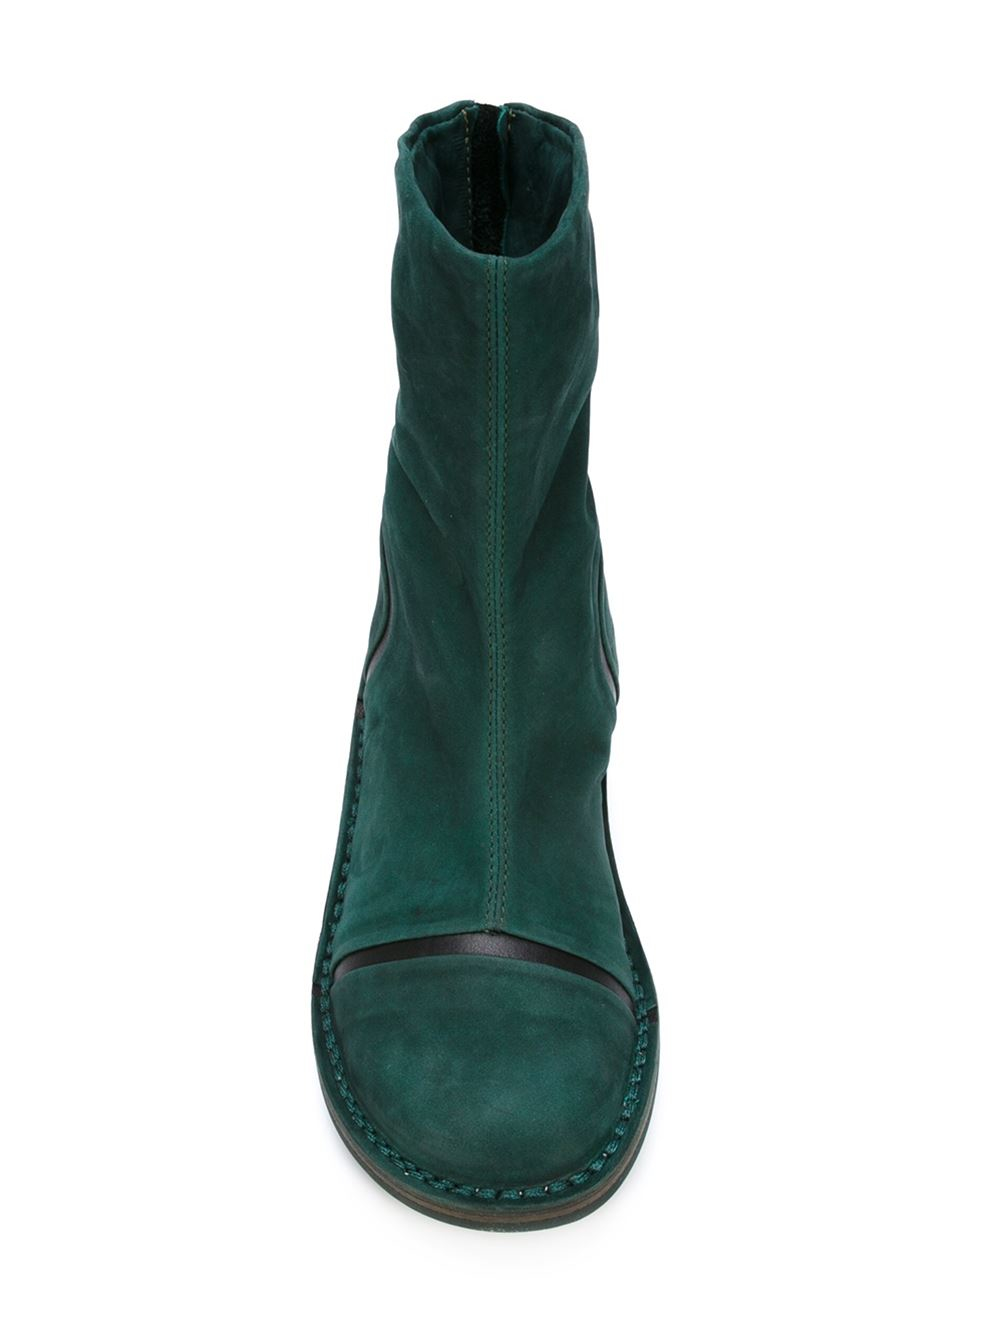 green wedge boots